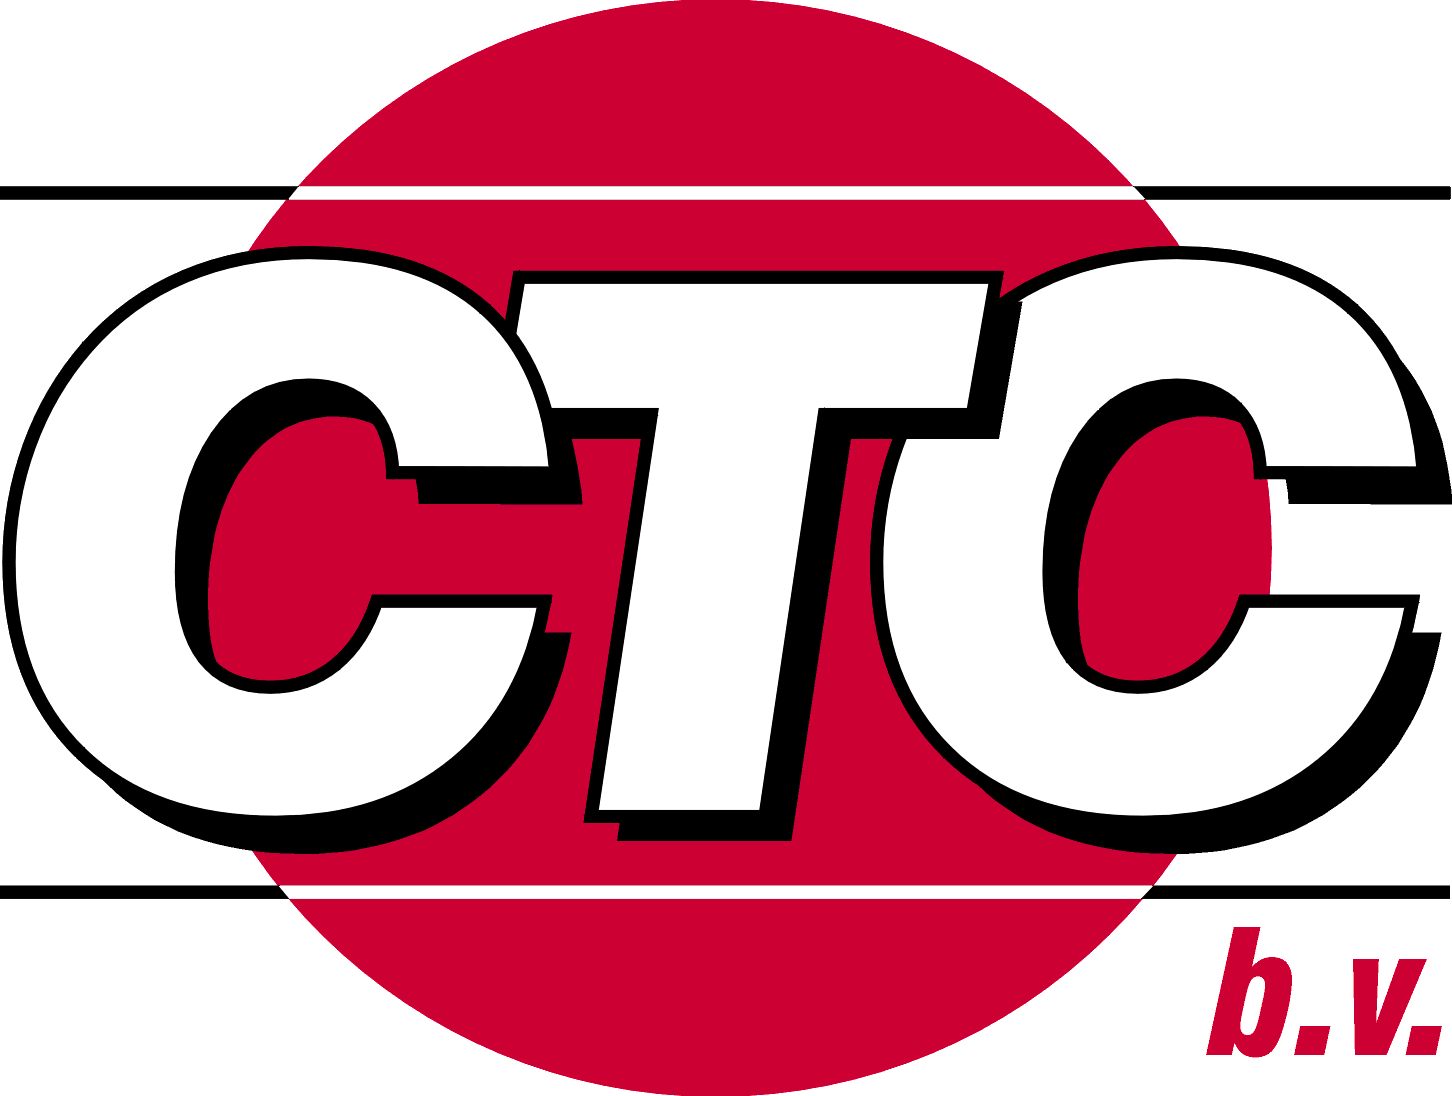 CTC b.v. Cleaning Technology and Consultancy Maassluis